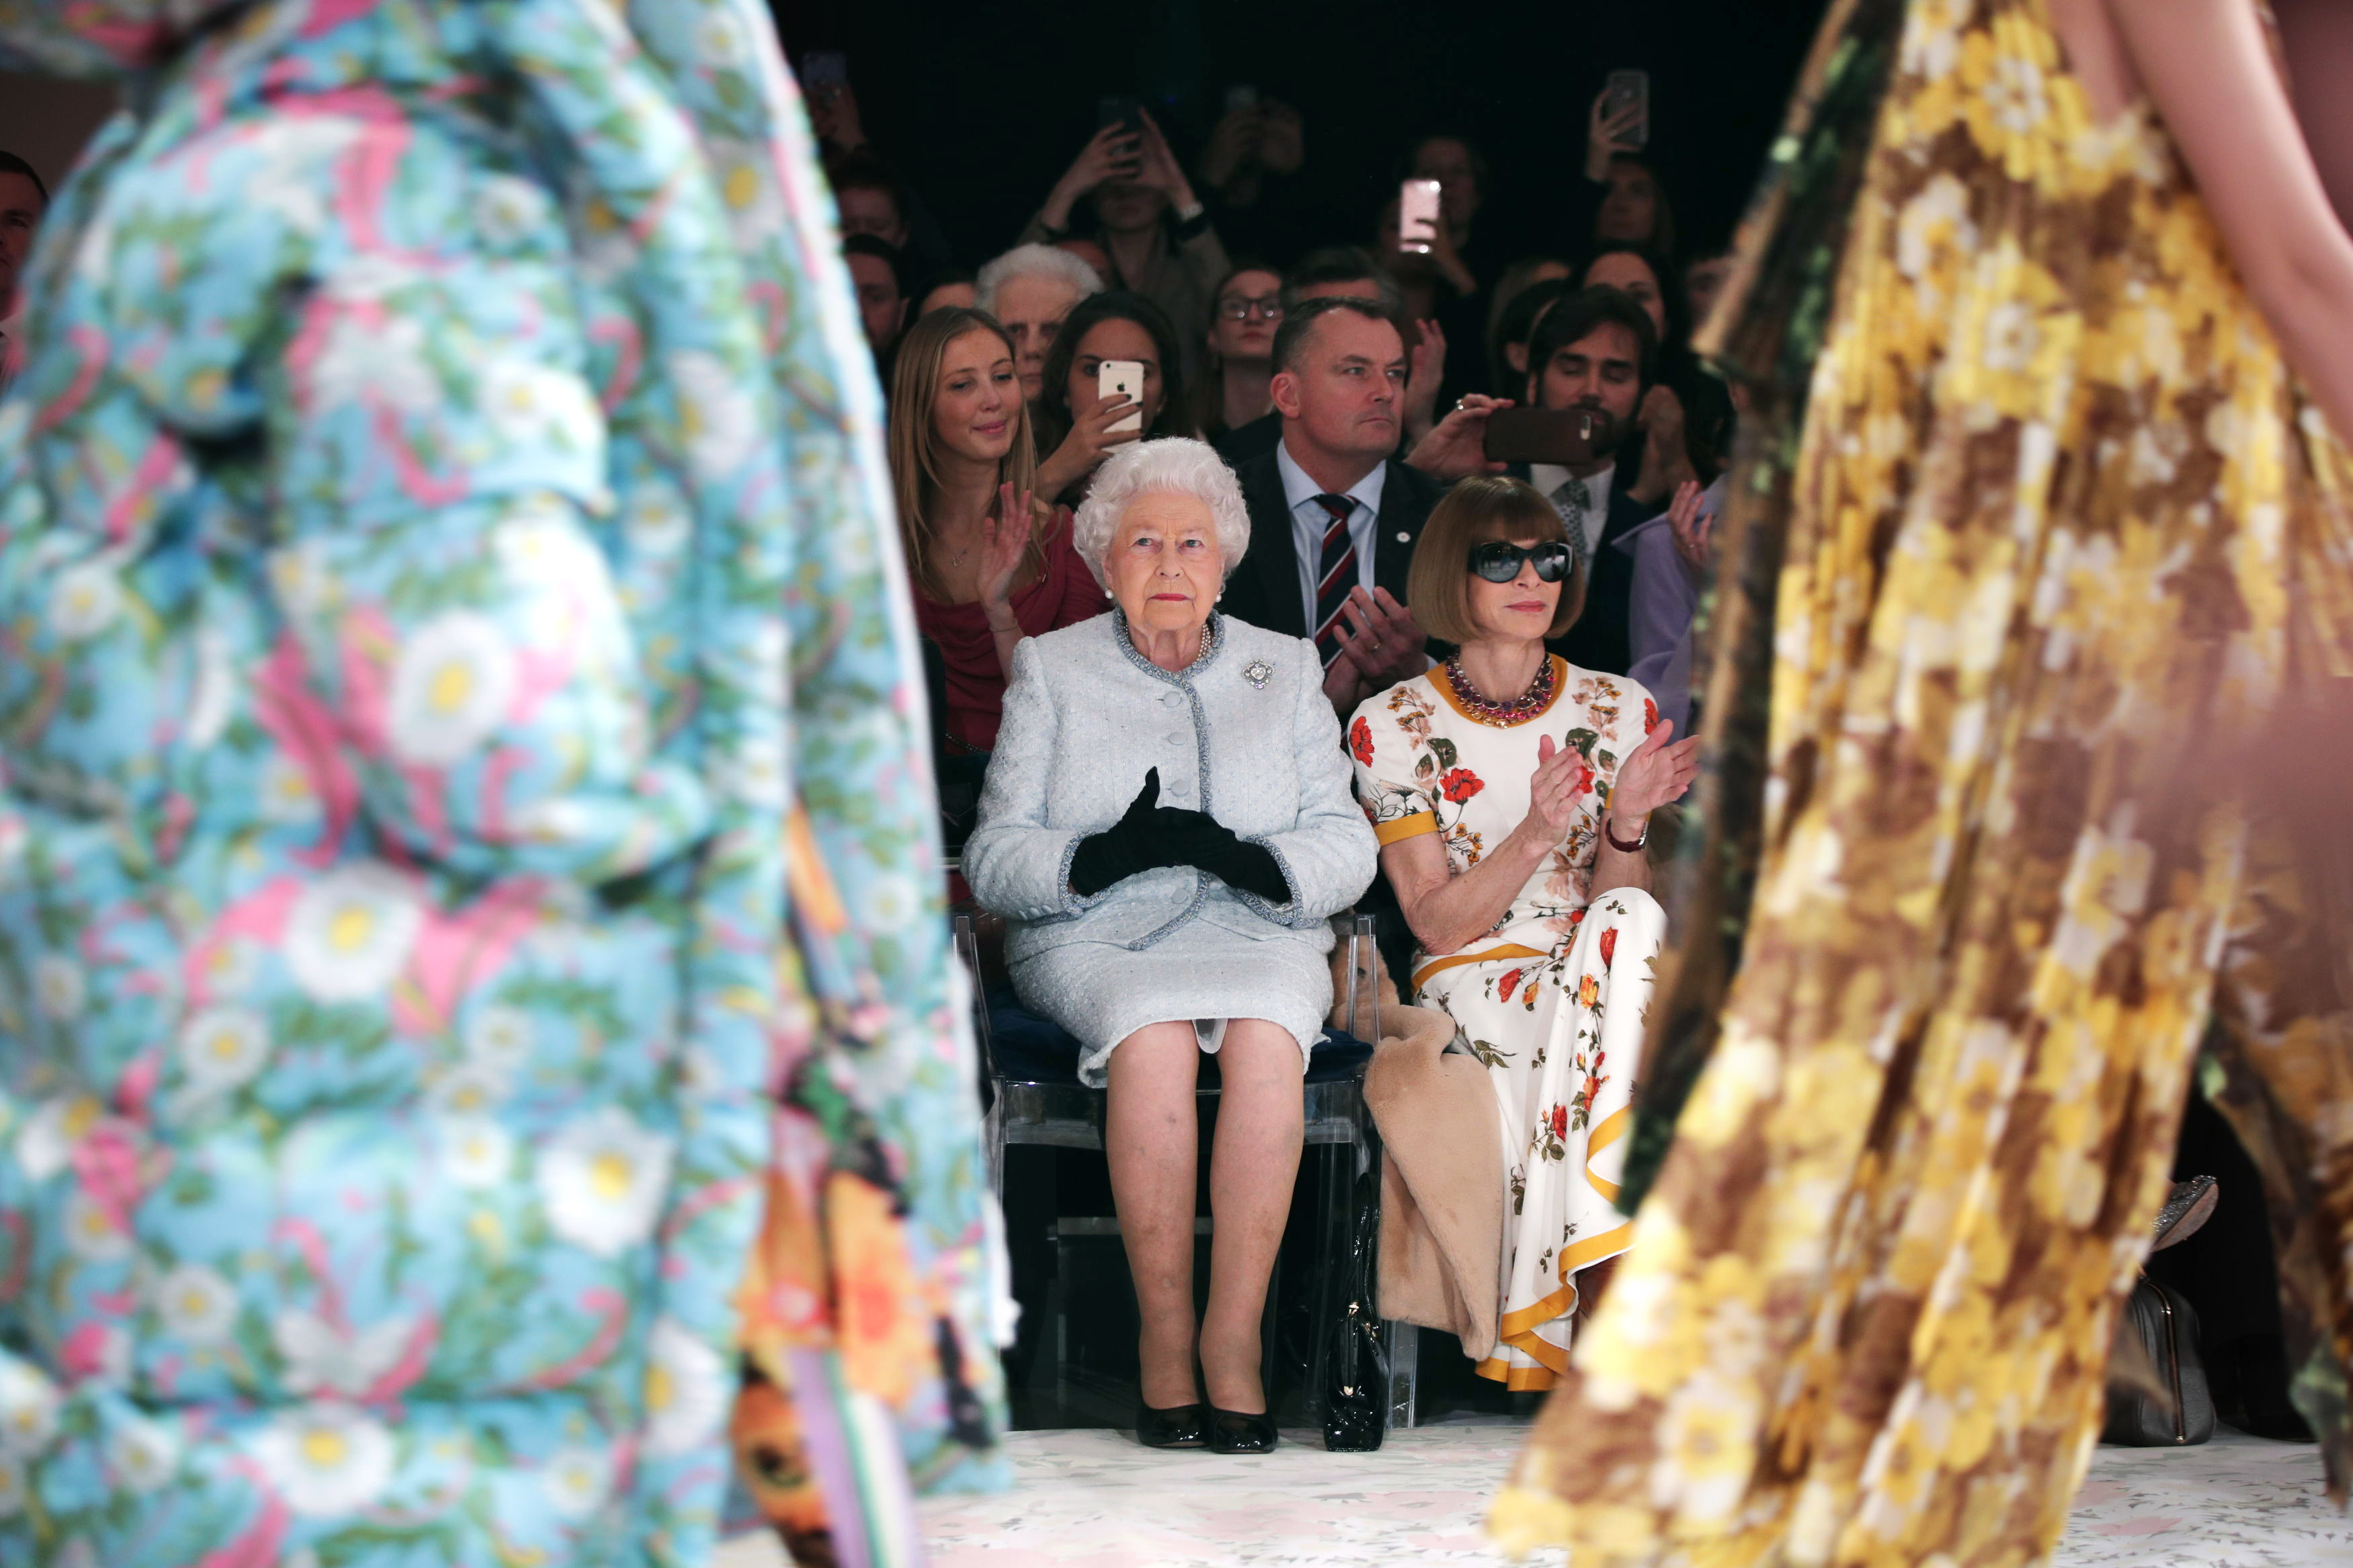 Queen Elizabeth II sitting next to Anna Wintour (right) at Quinn's show in 2018 